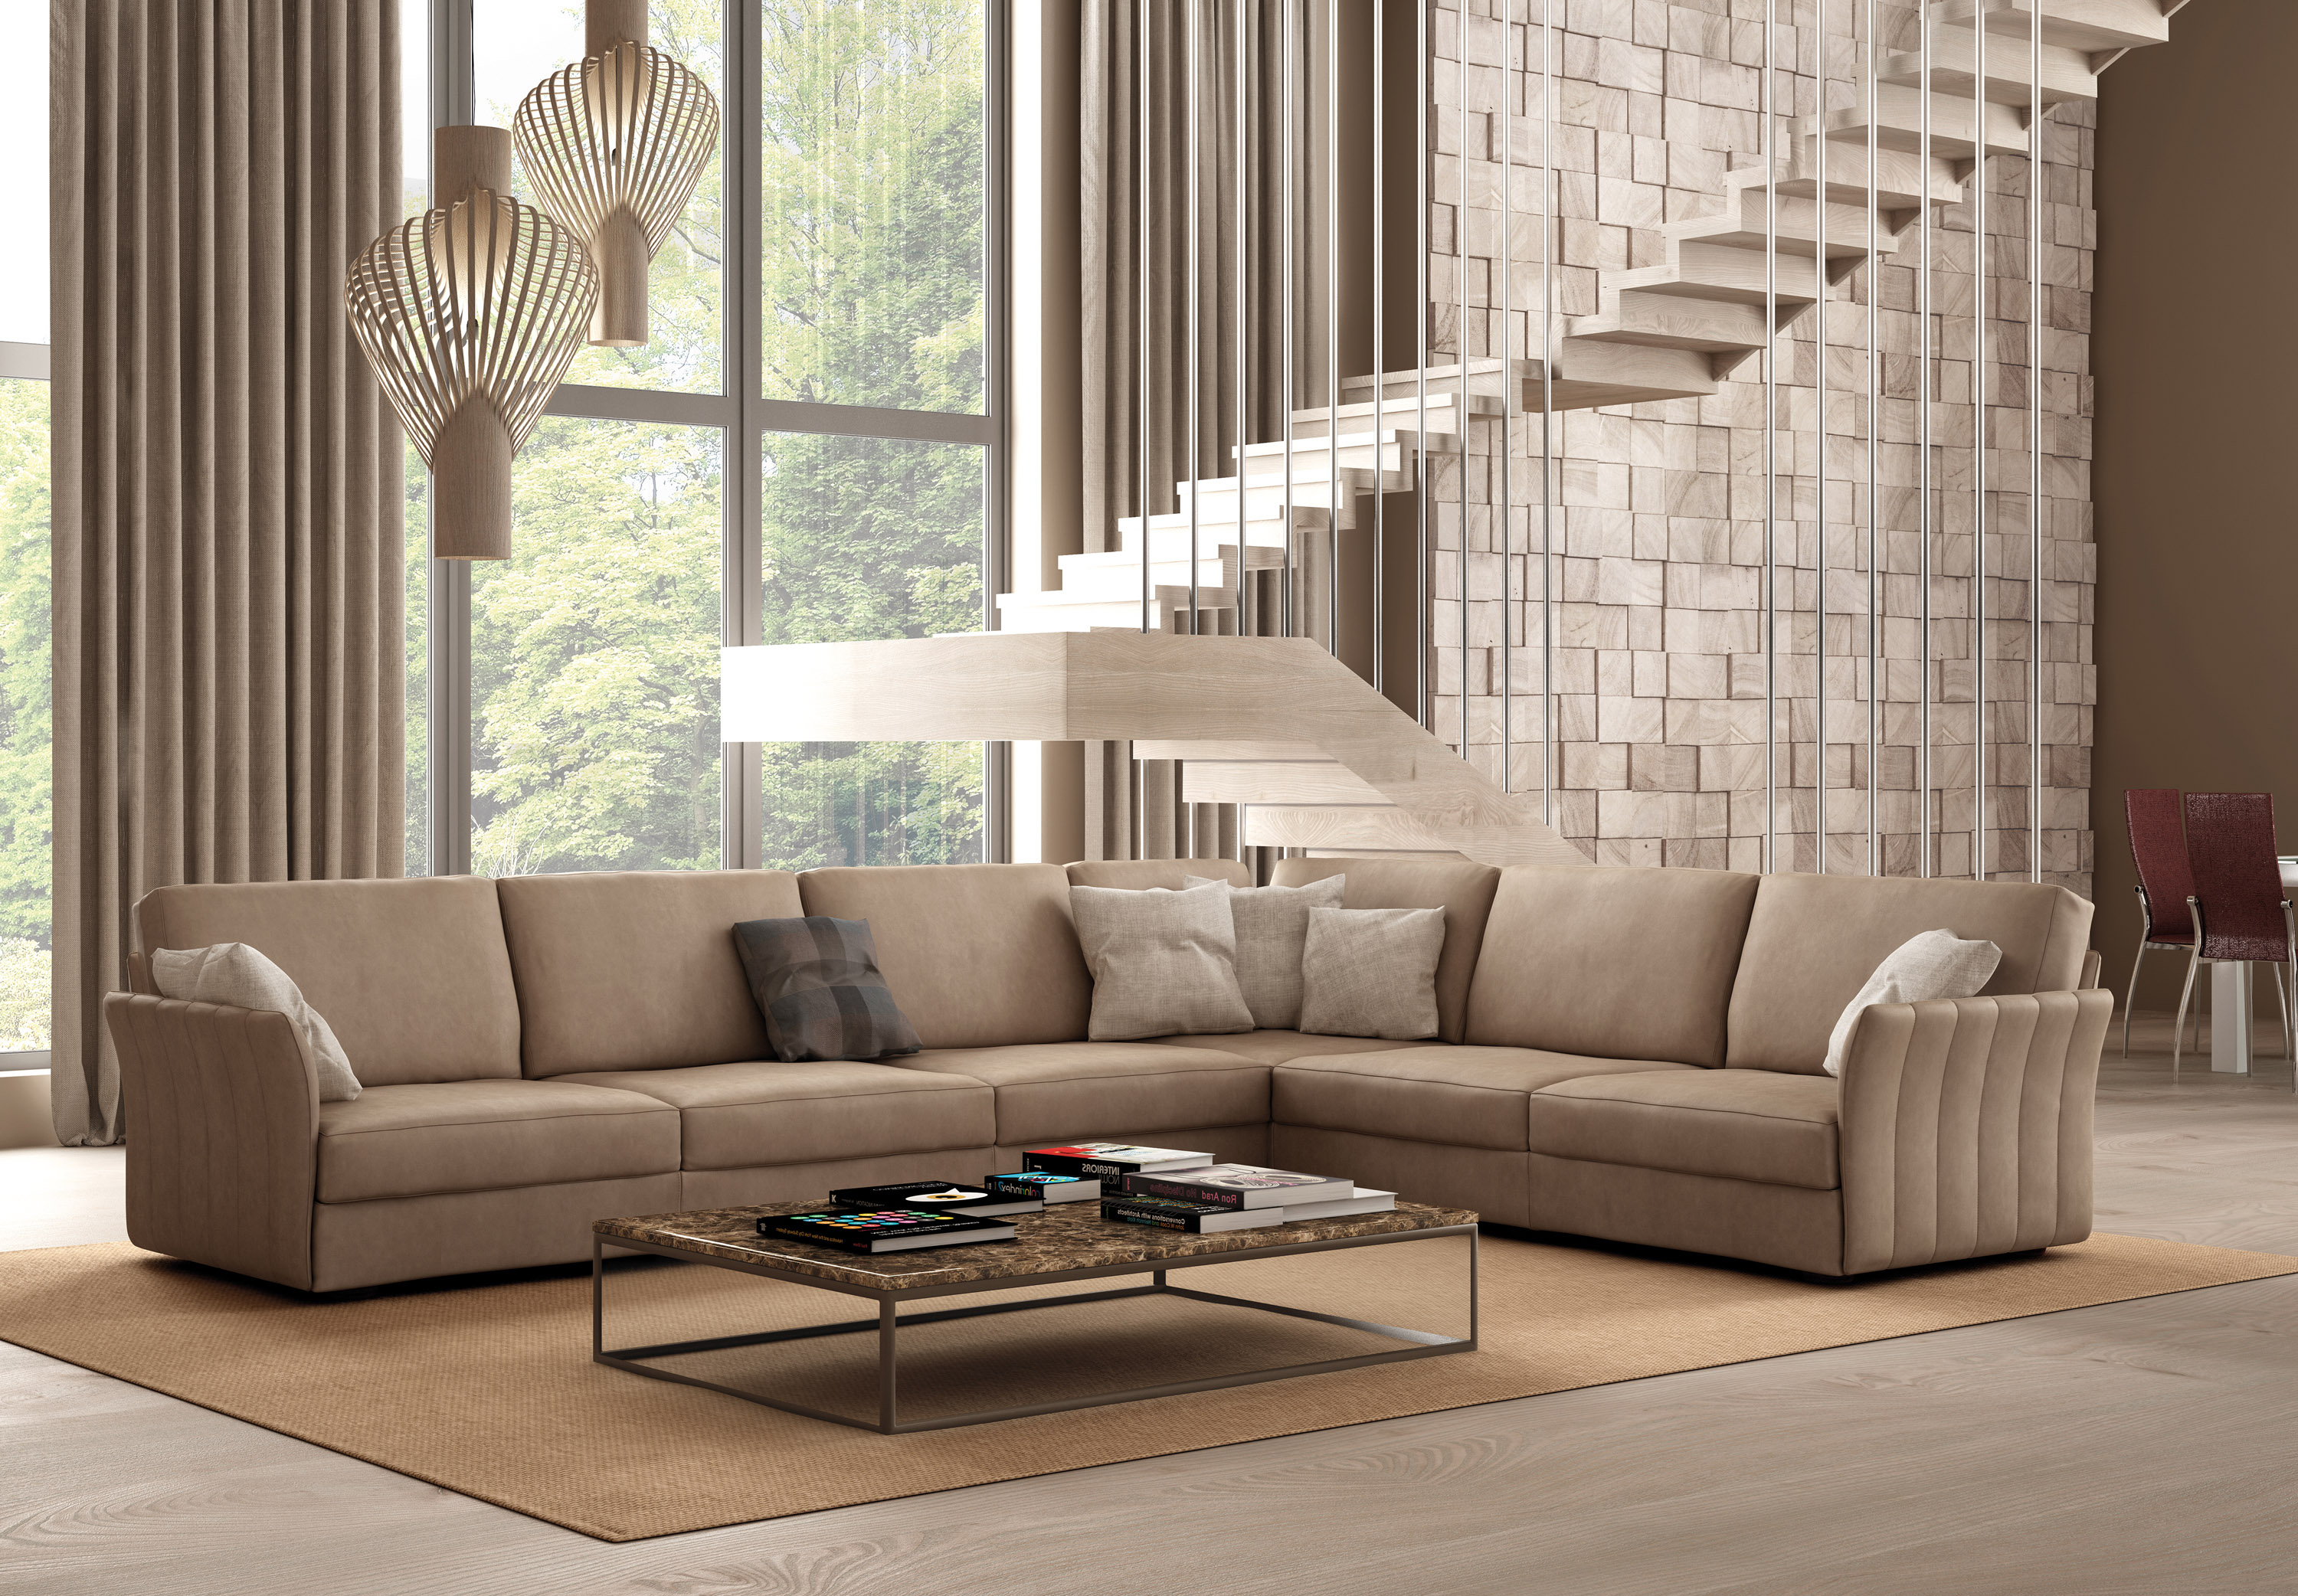 Upscale Sectional Sofas Matttroy